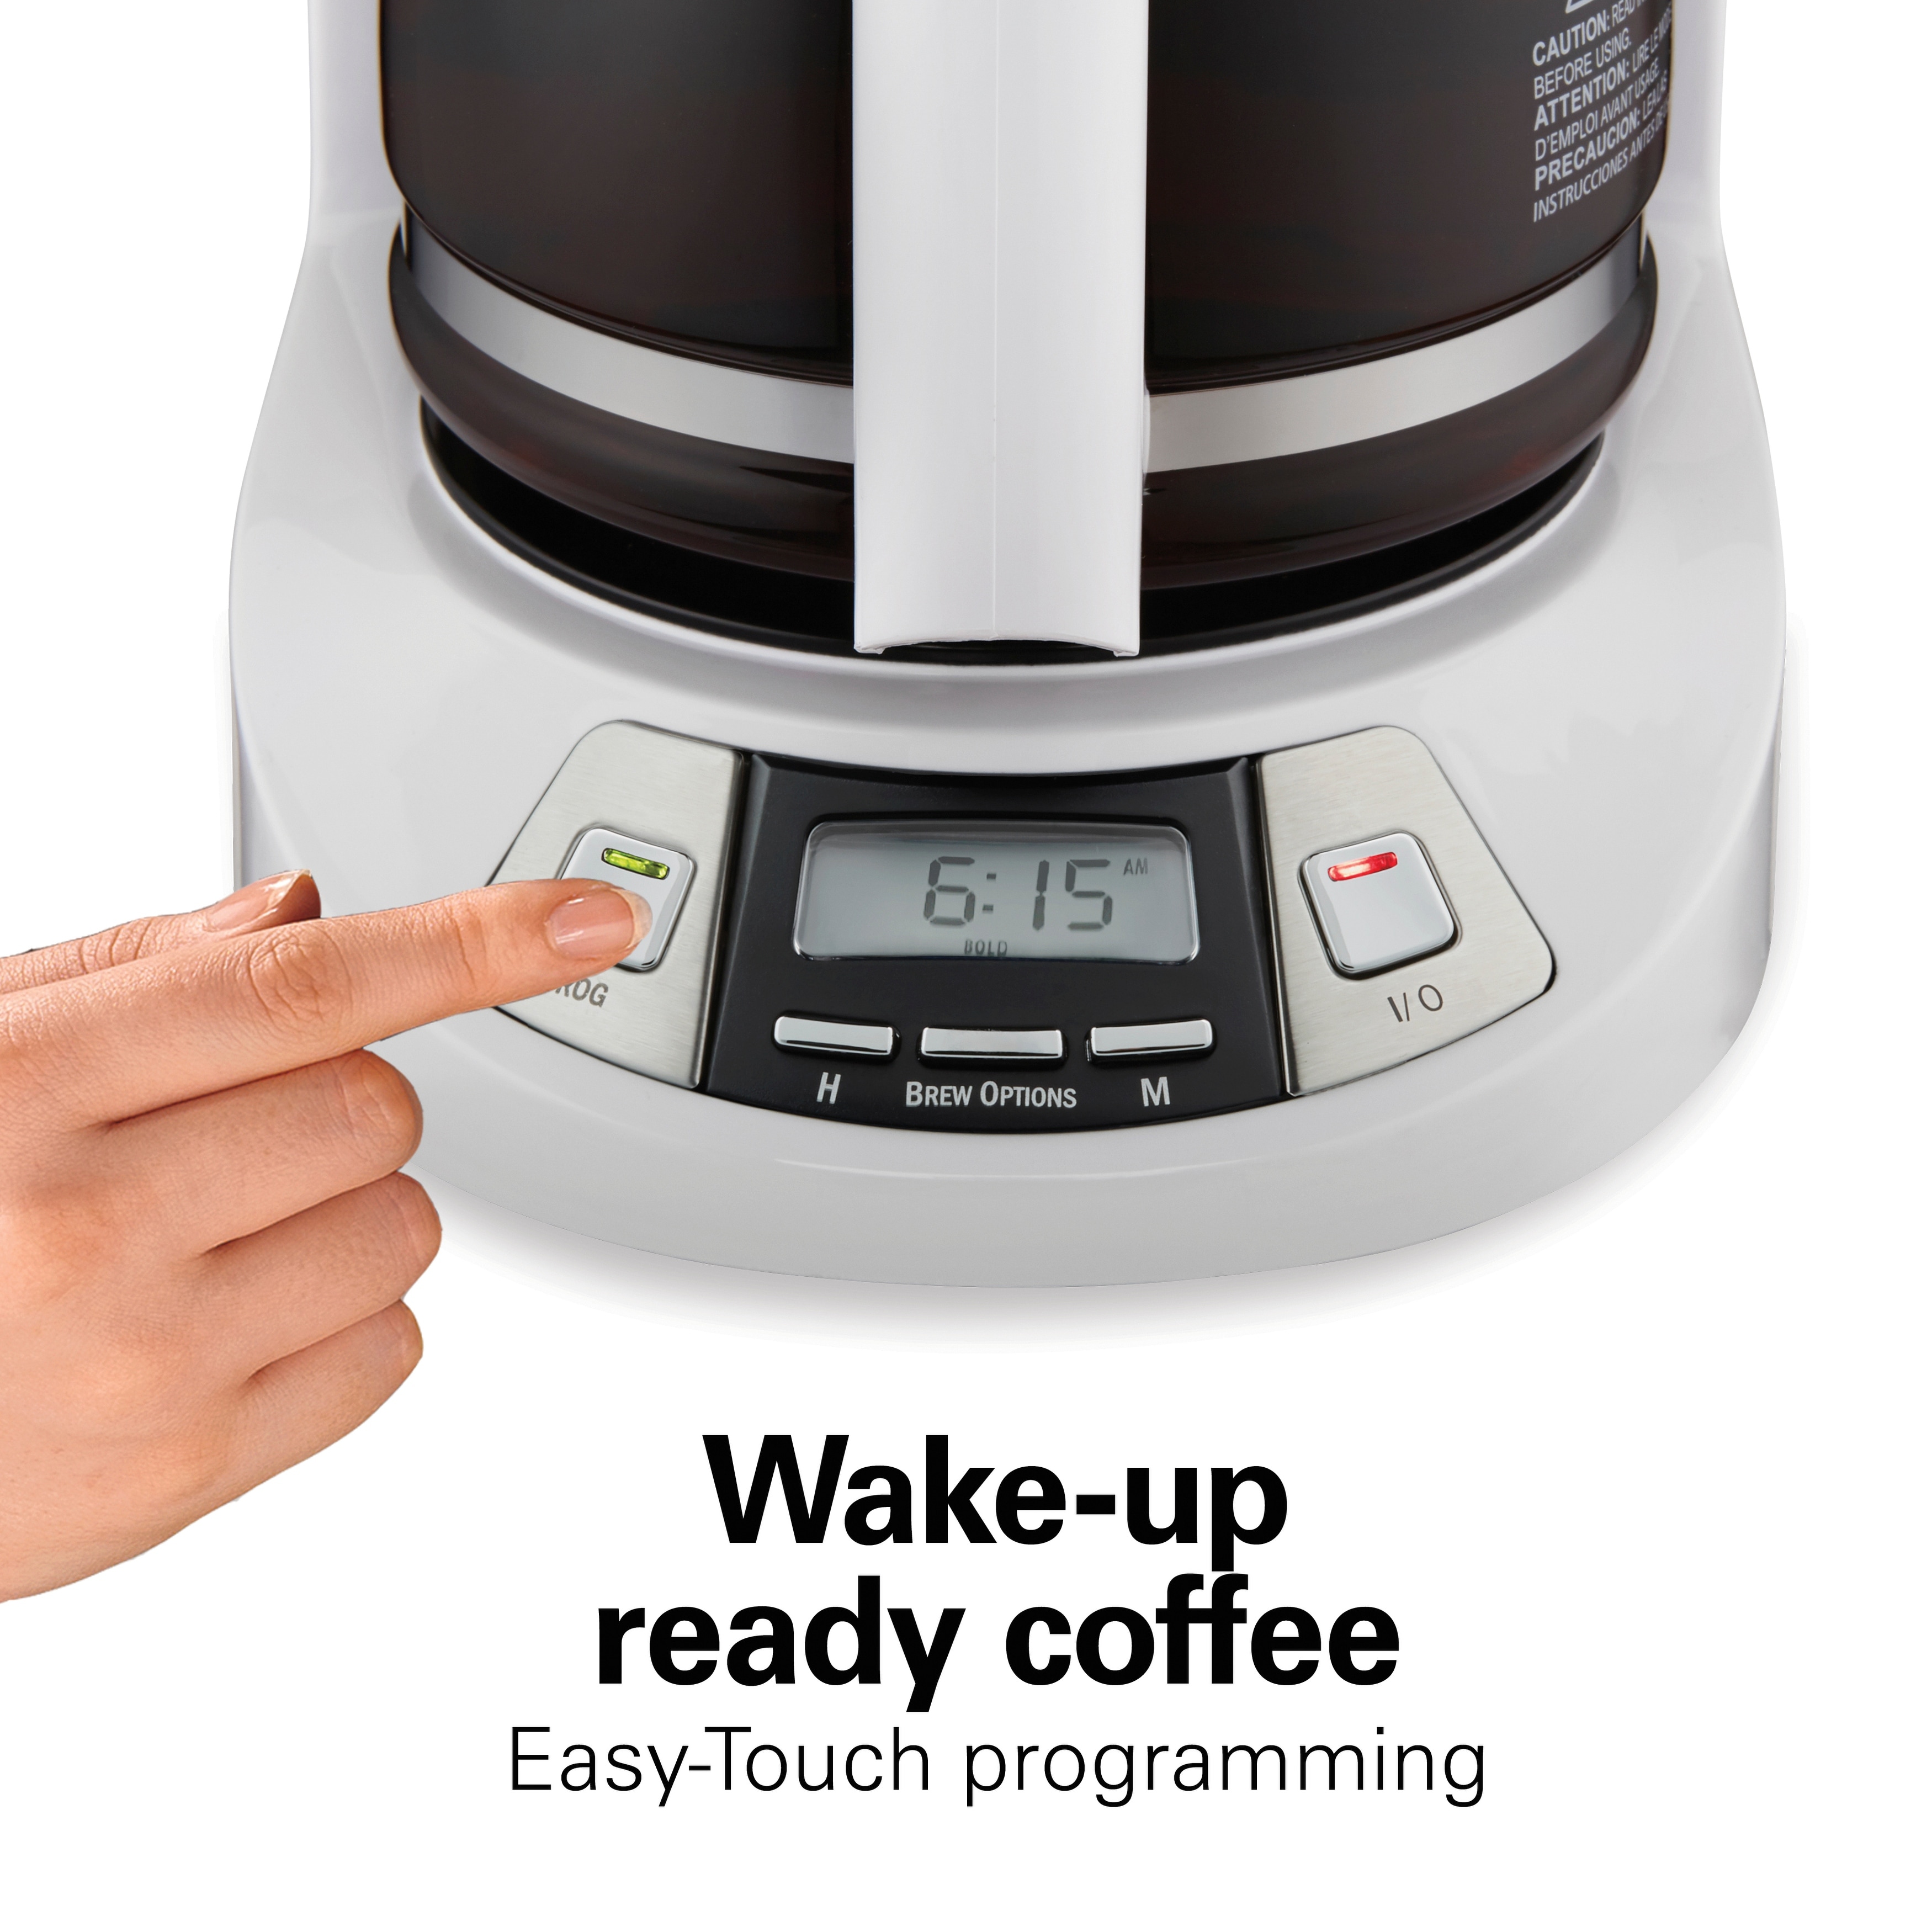 https://ak1.ostkcdn.com/images/products/is/images/direct/fa9ebec68e0d4d5d69669ff7ef726ae8b83b48e7/Programmable-Coffee-Maker.jpg